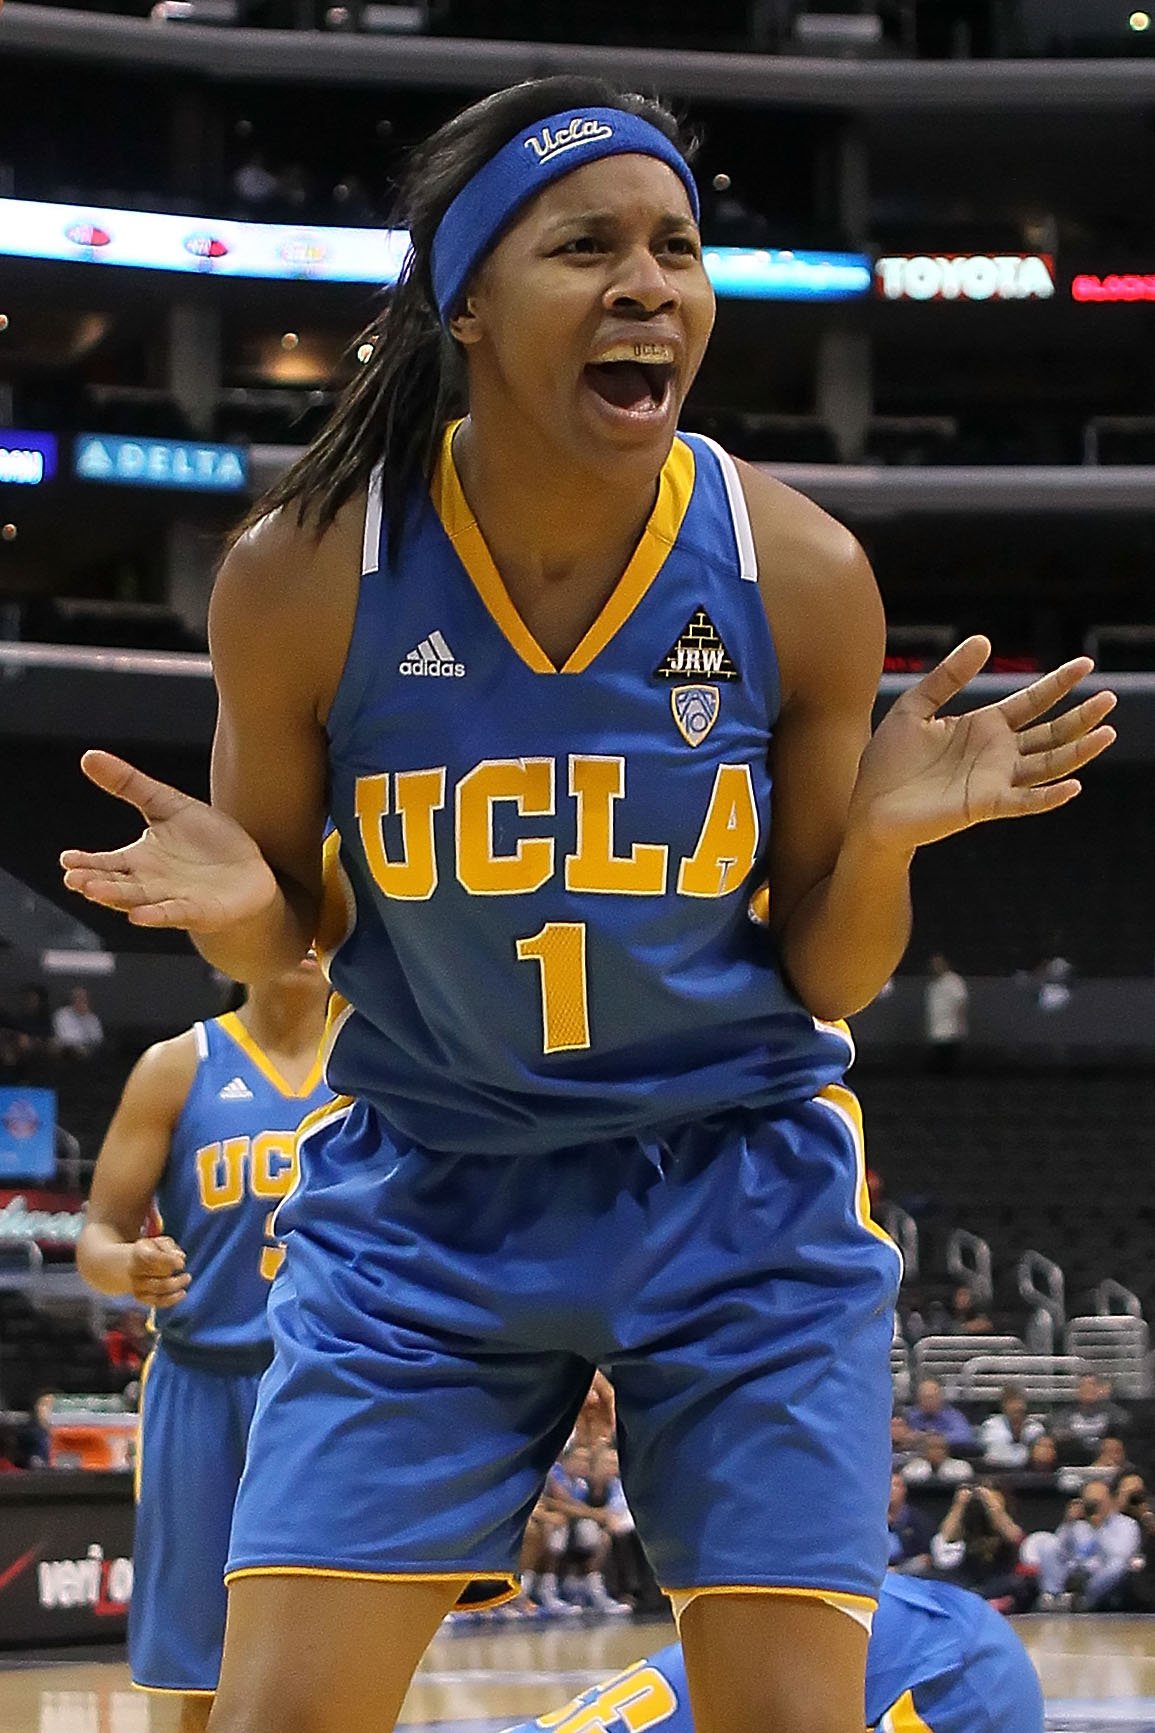 Nina Earl #1 of the UCLA Bruins playing the Stanford Cardinal in 2011 Pacific Life Pac-10 Women's Basketball Tournament in Los Angeles. | Source: Getty Images 